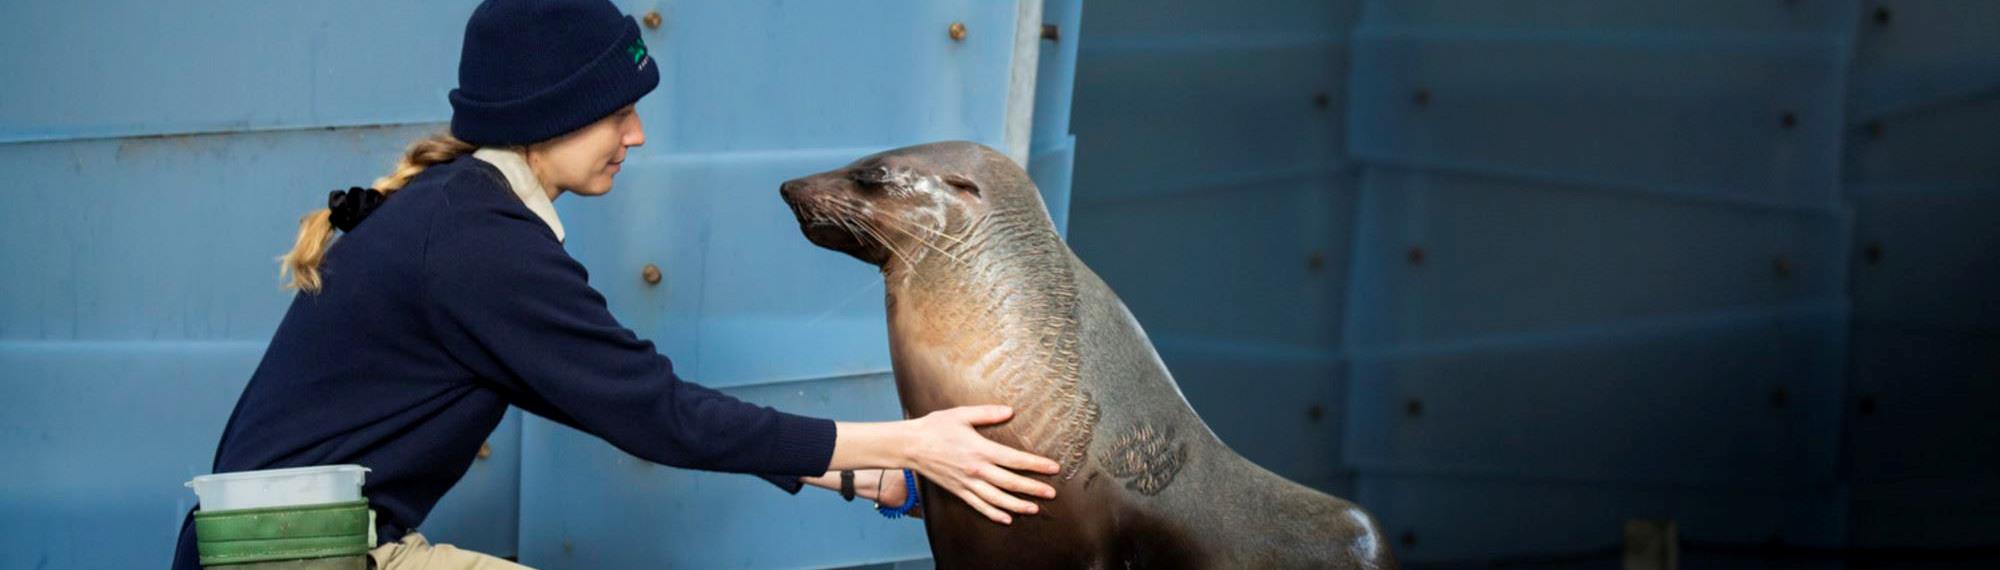 Zoo keeper kneeling next to a seal, touching the seal's body.